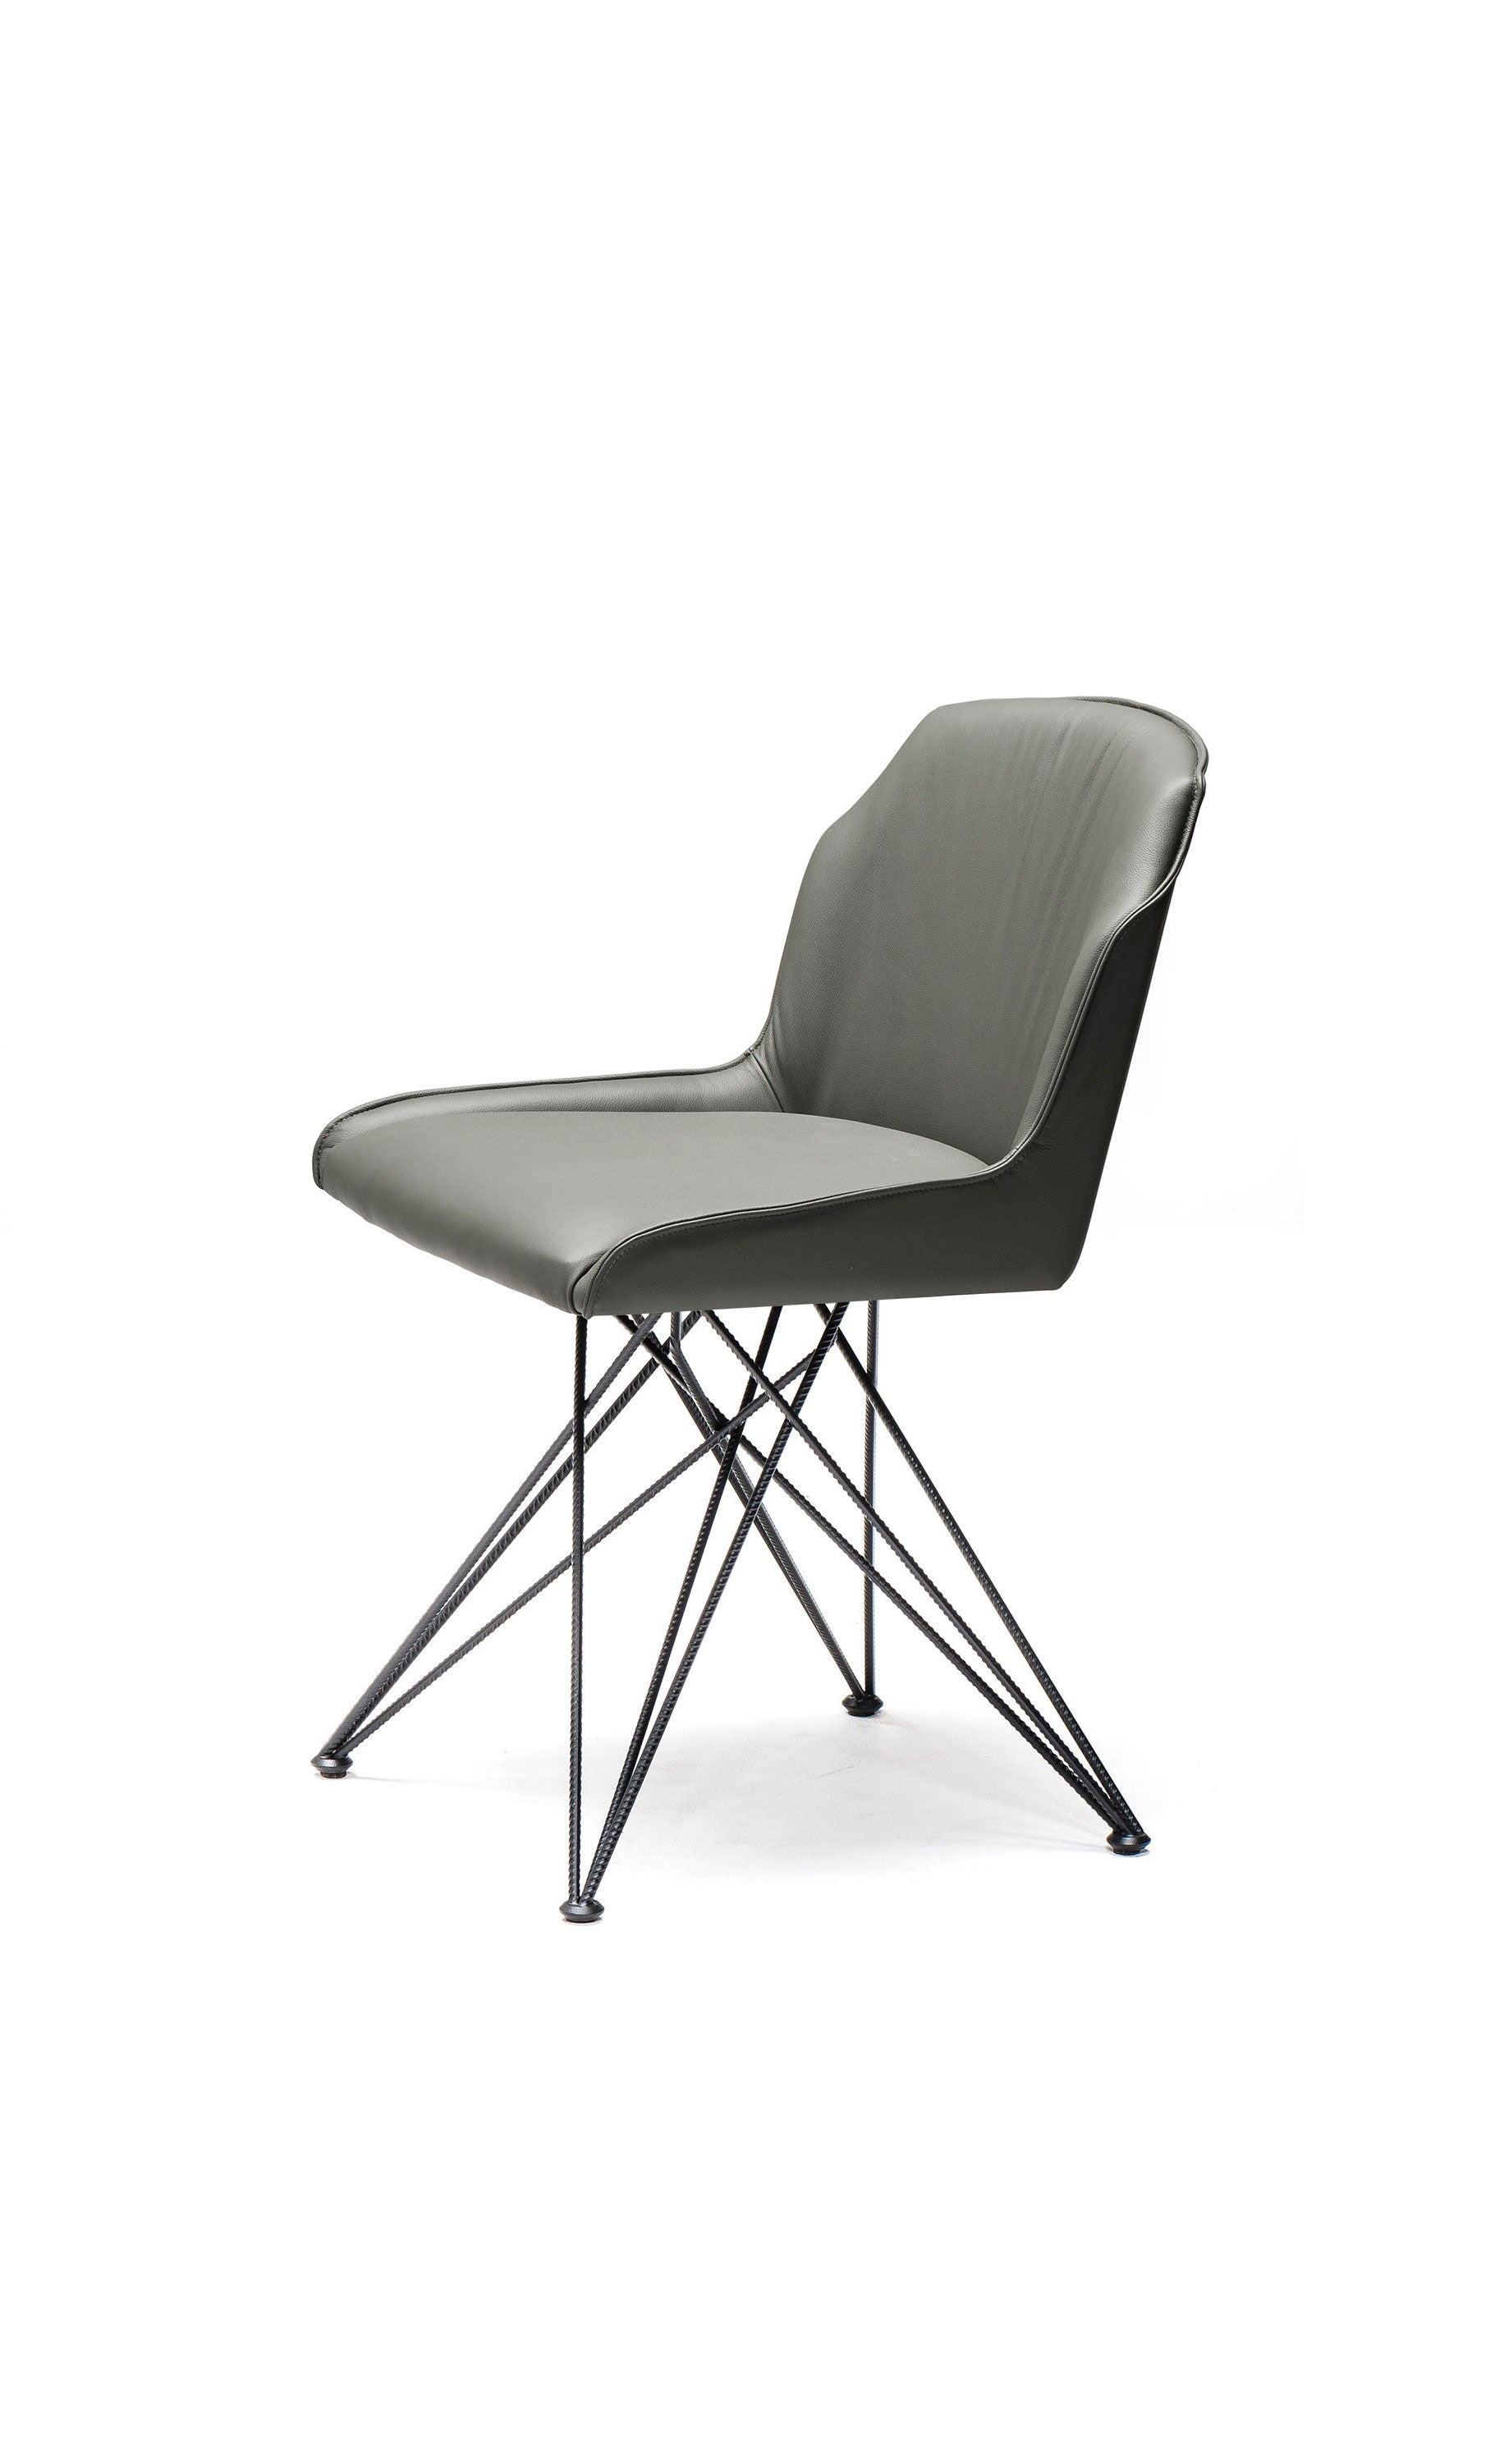 cattelan italia flaminia Swiveling Chair With or Without Arms